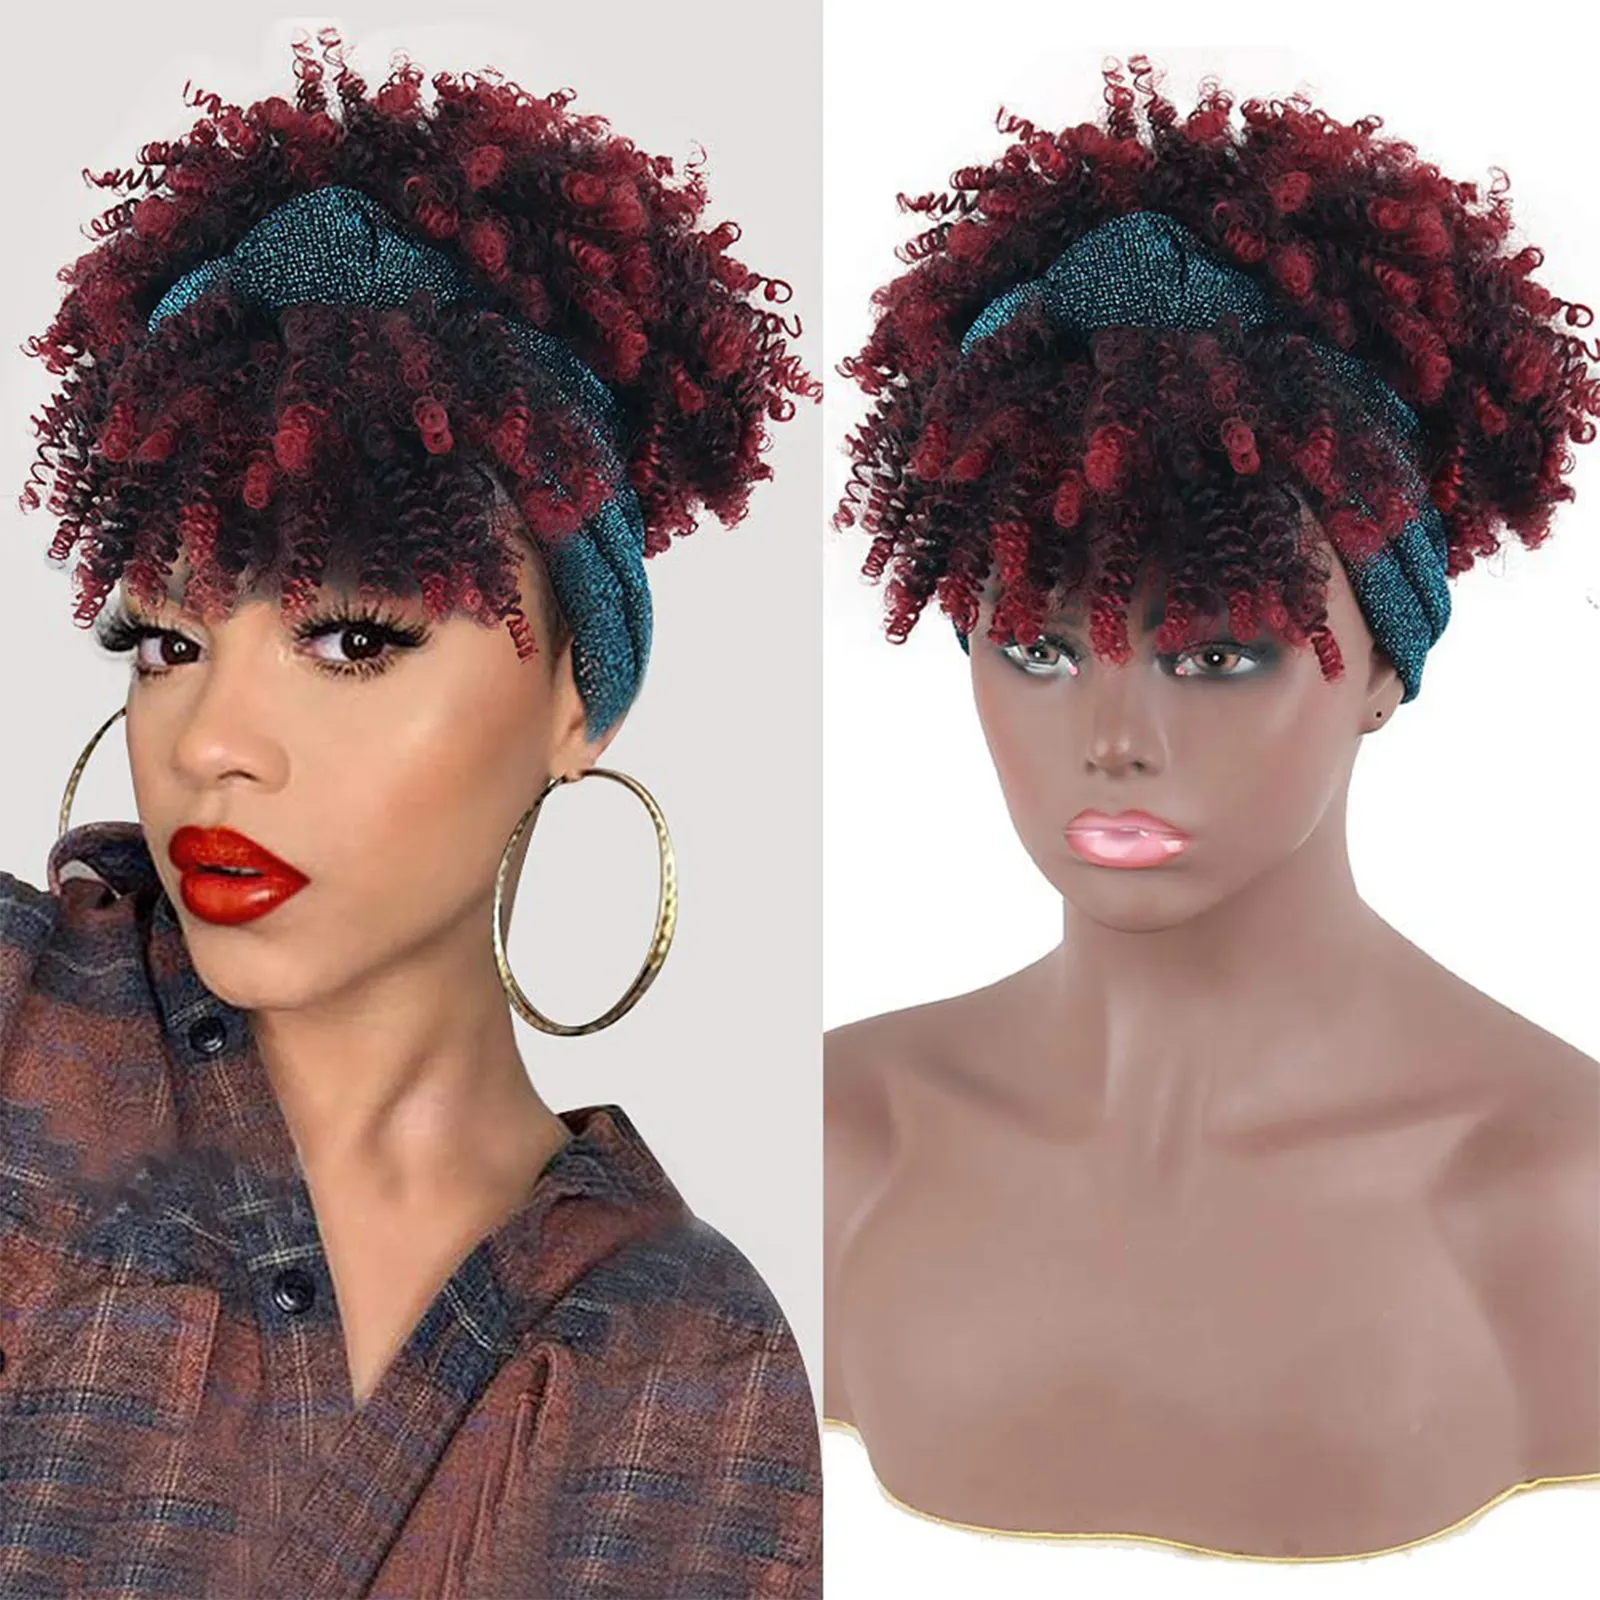 G&T Wig Afro High Puff Hair Bun With Bangs Short Kinky Curly Pineapple Hair Extensions Headband Wig for Black Women